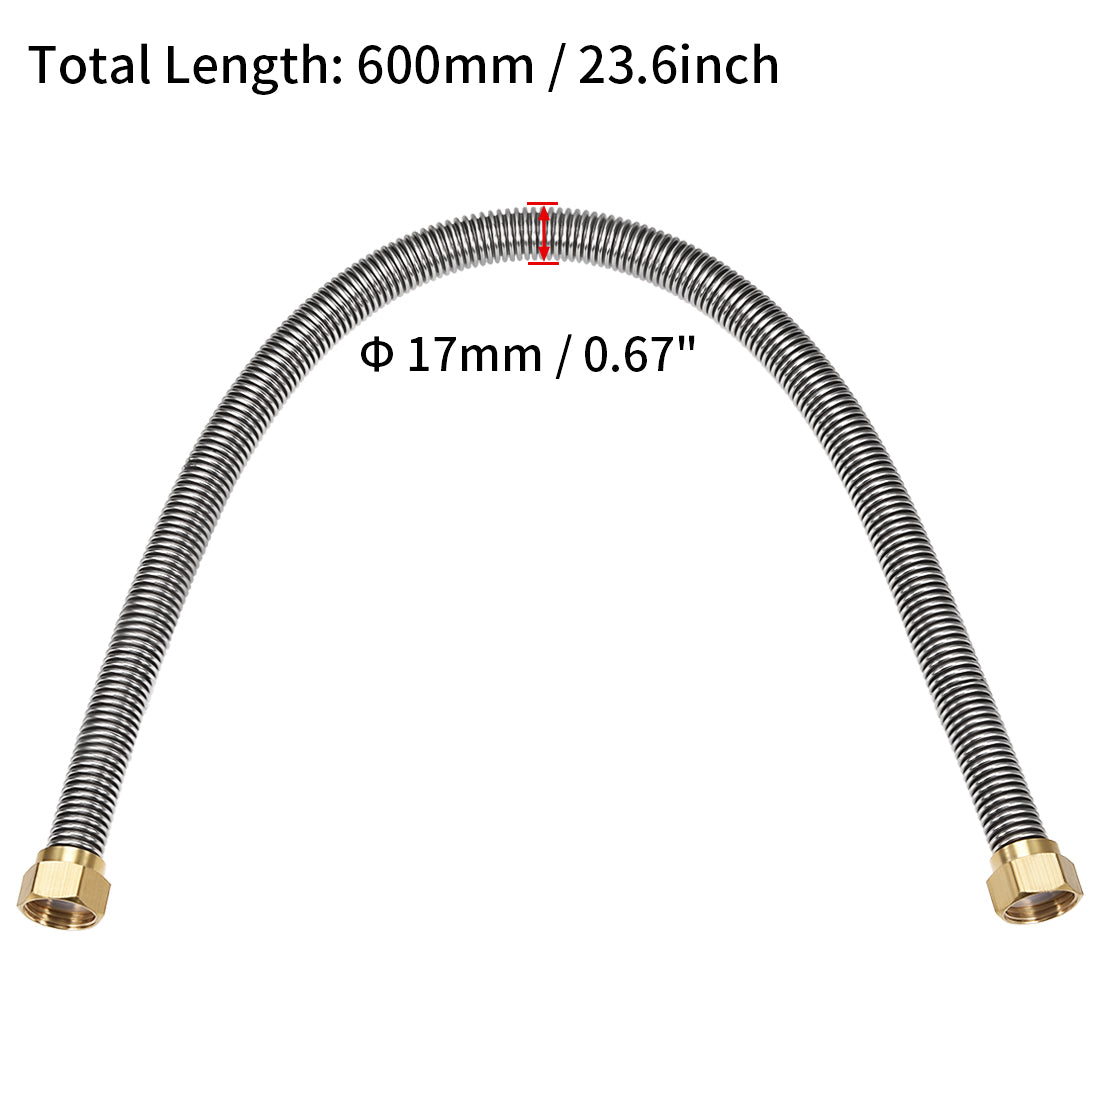 Uxcell Uxcell Corrugated Stainless Steel Flexible Water Line 23.6inch Length G1/2 Female Threaded Connector with Washer